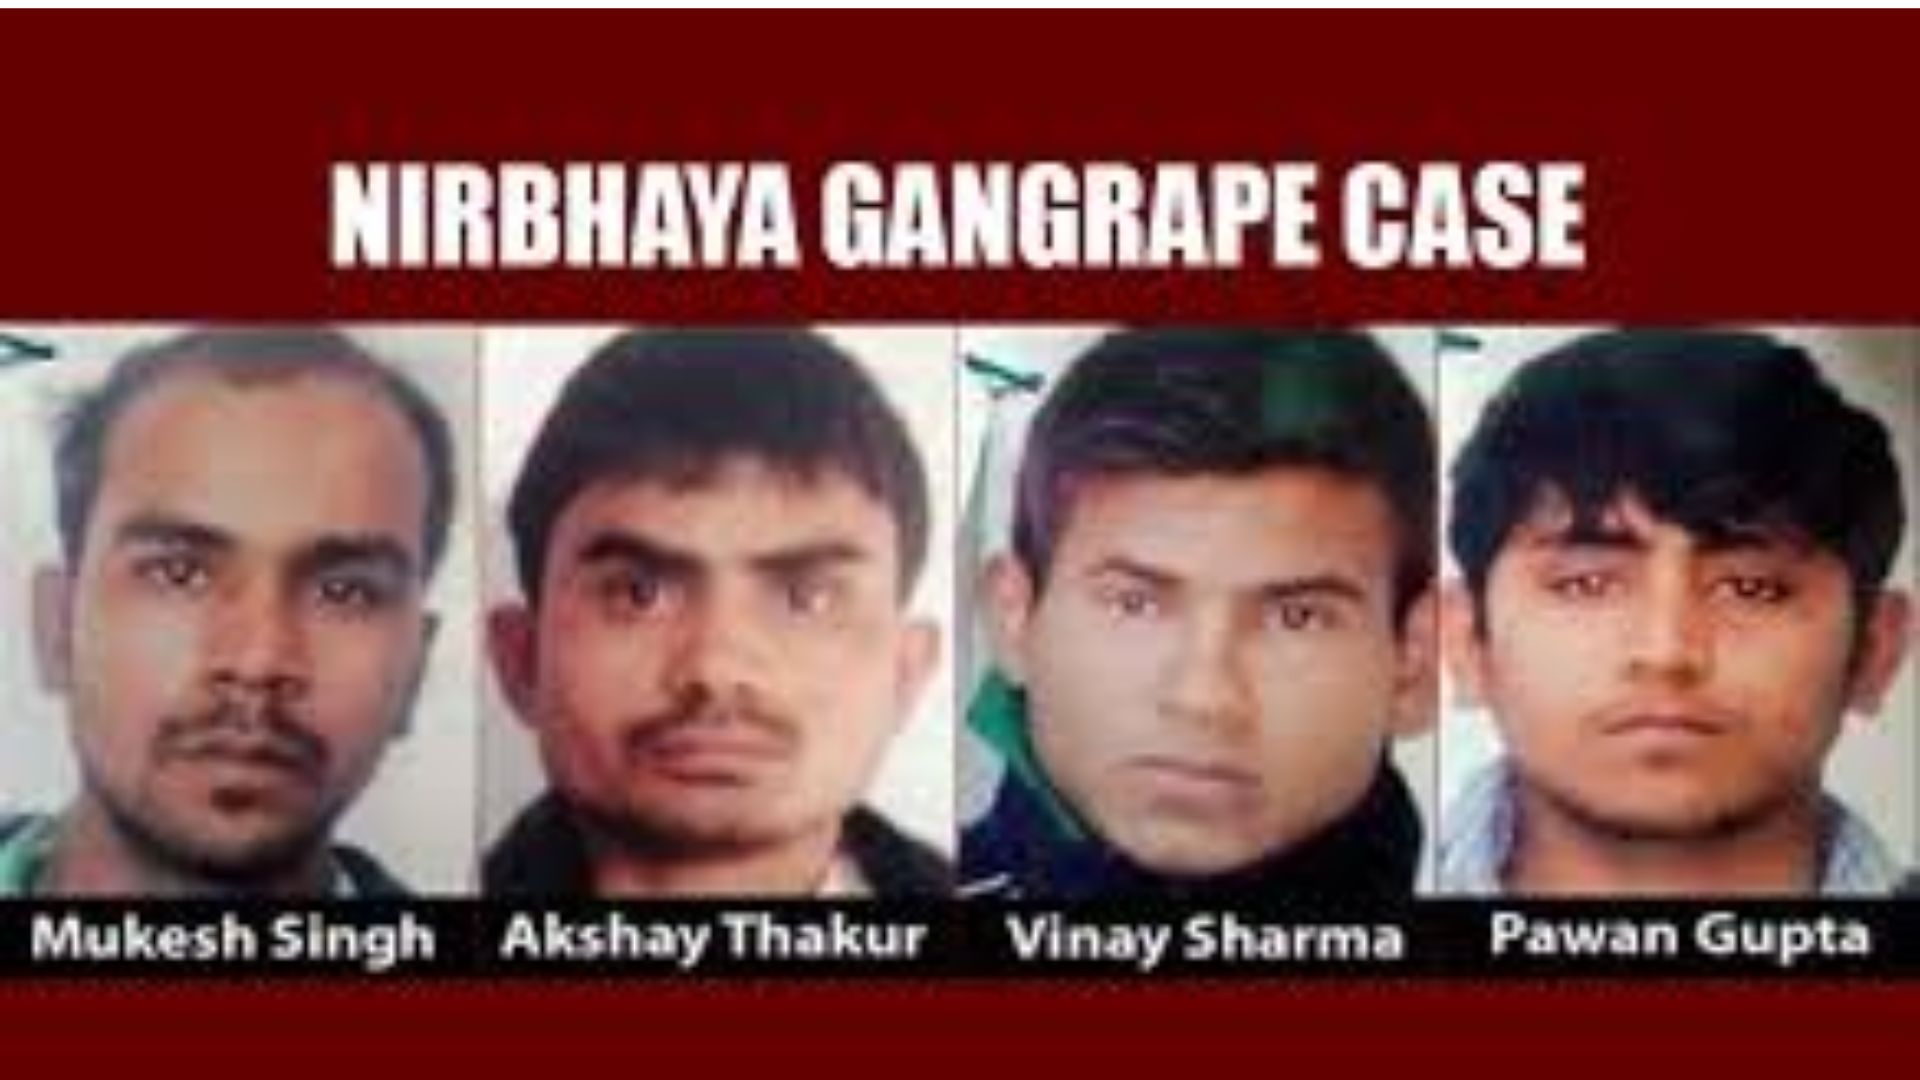 March 20, Historical Event: After 7 Years of legal battle, Nirbhaya’s Killers Hanged on this day